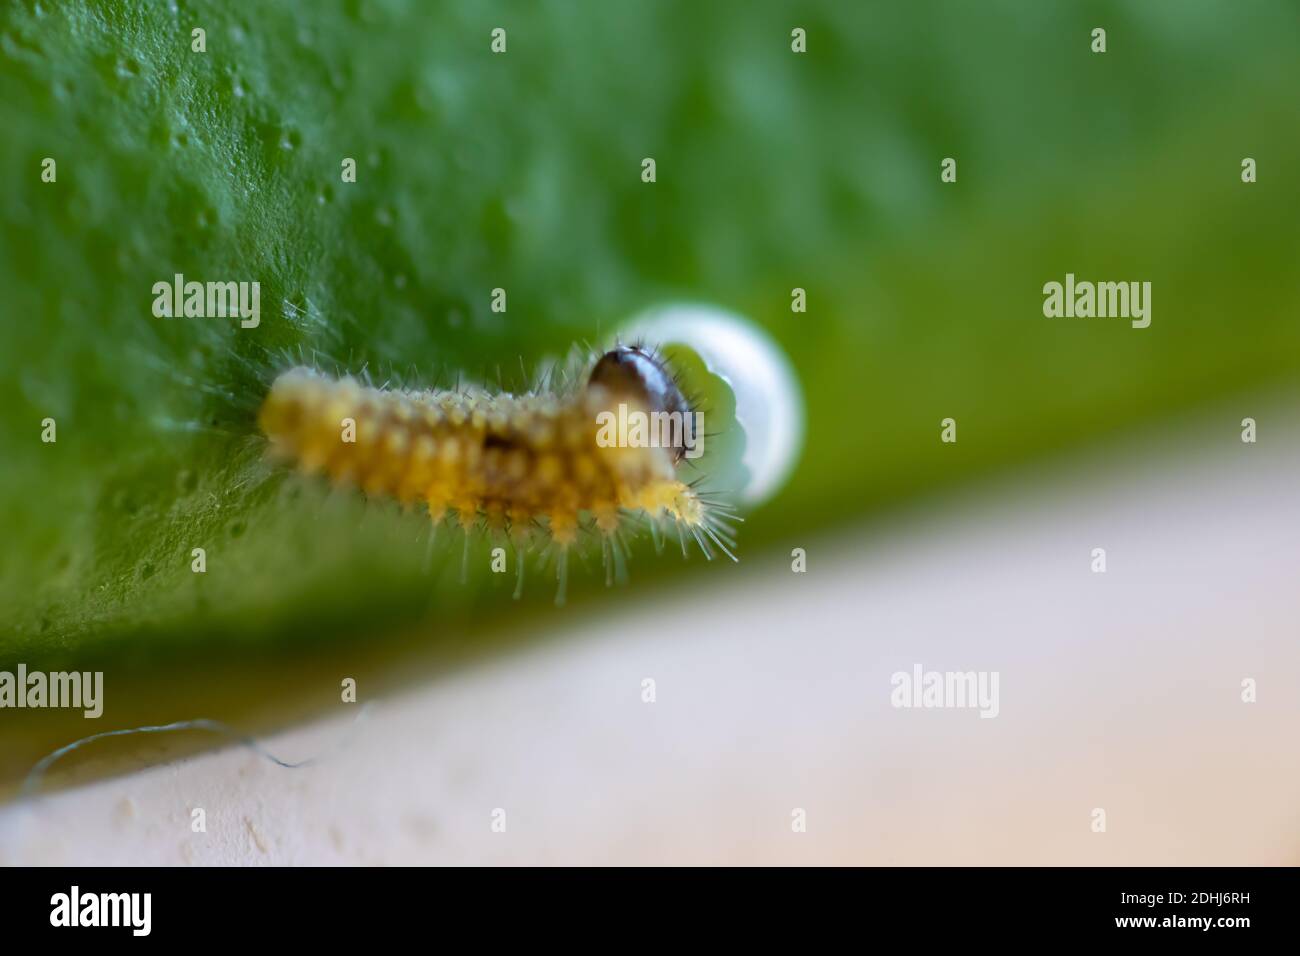 A small yellow larva of butterfly on the leaf daytime super closeup Stock Photo